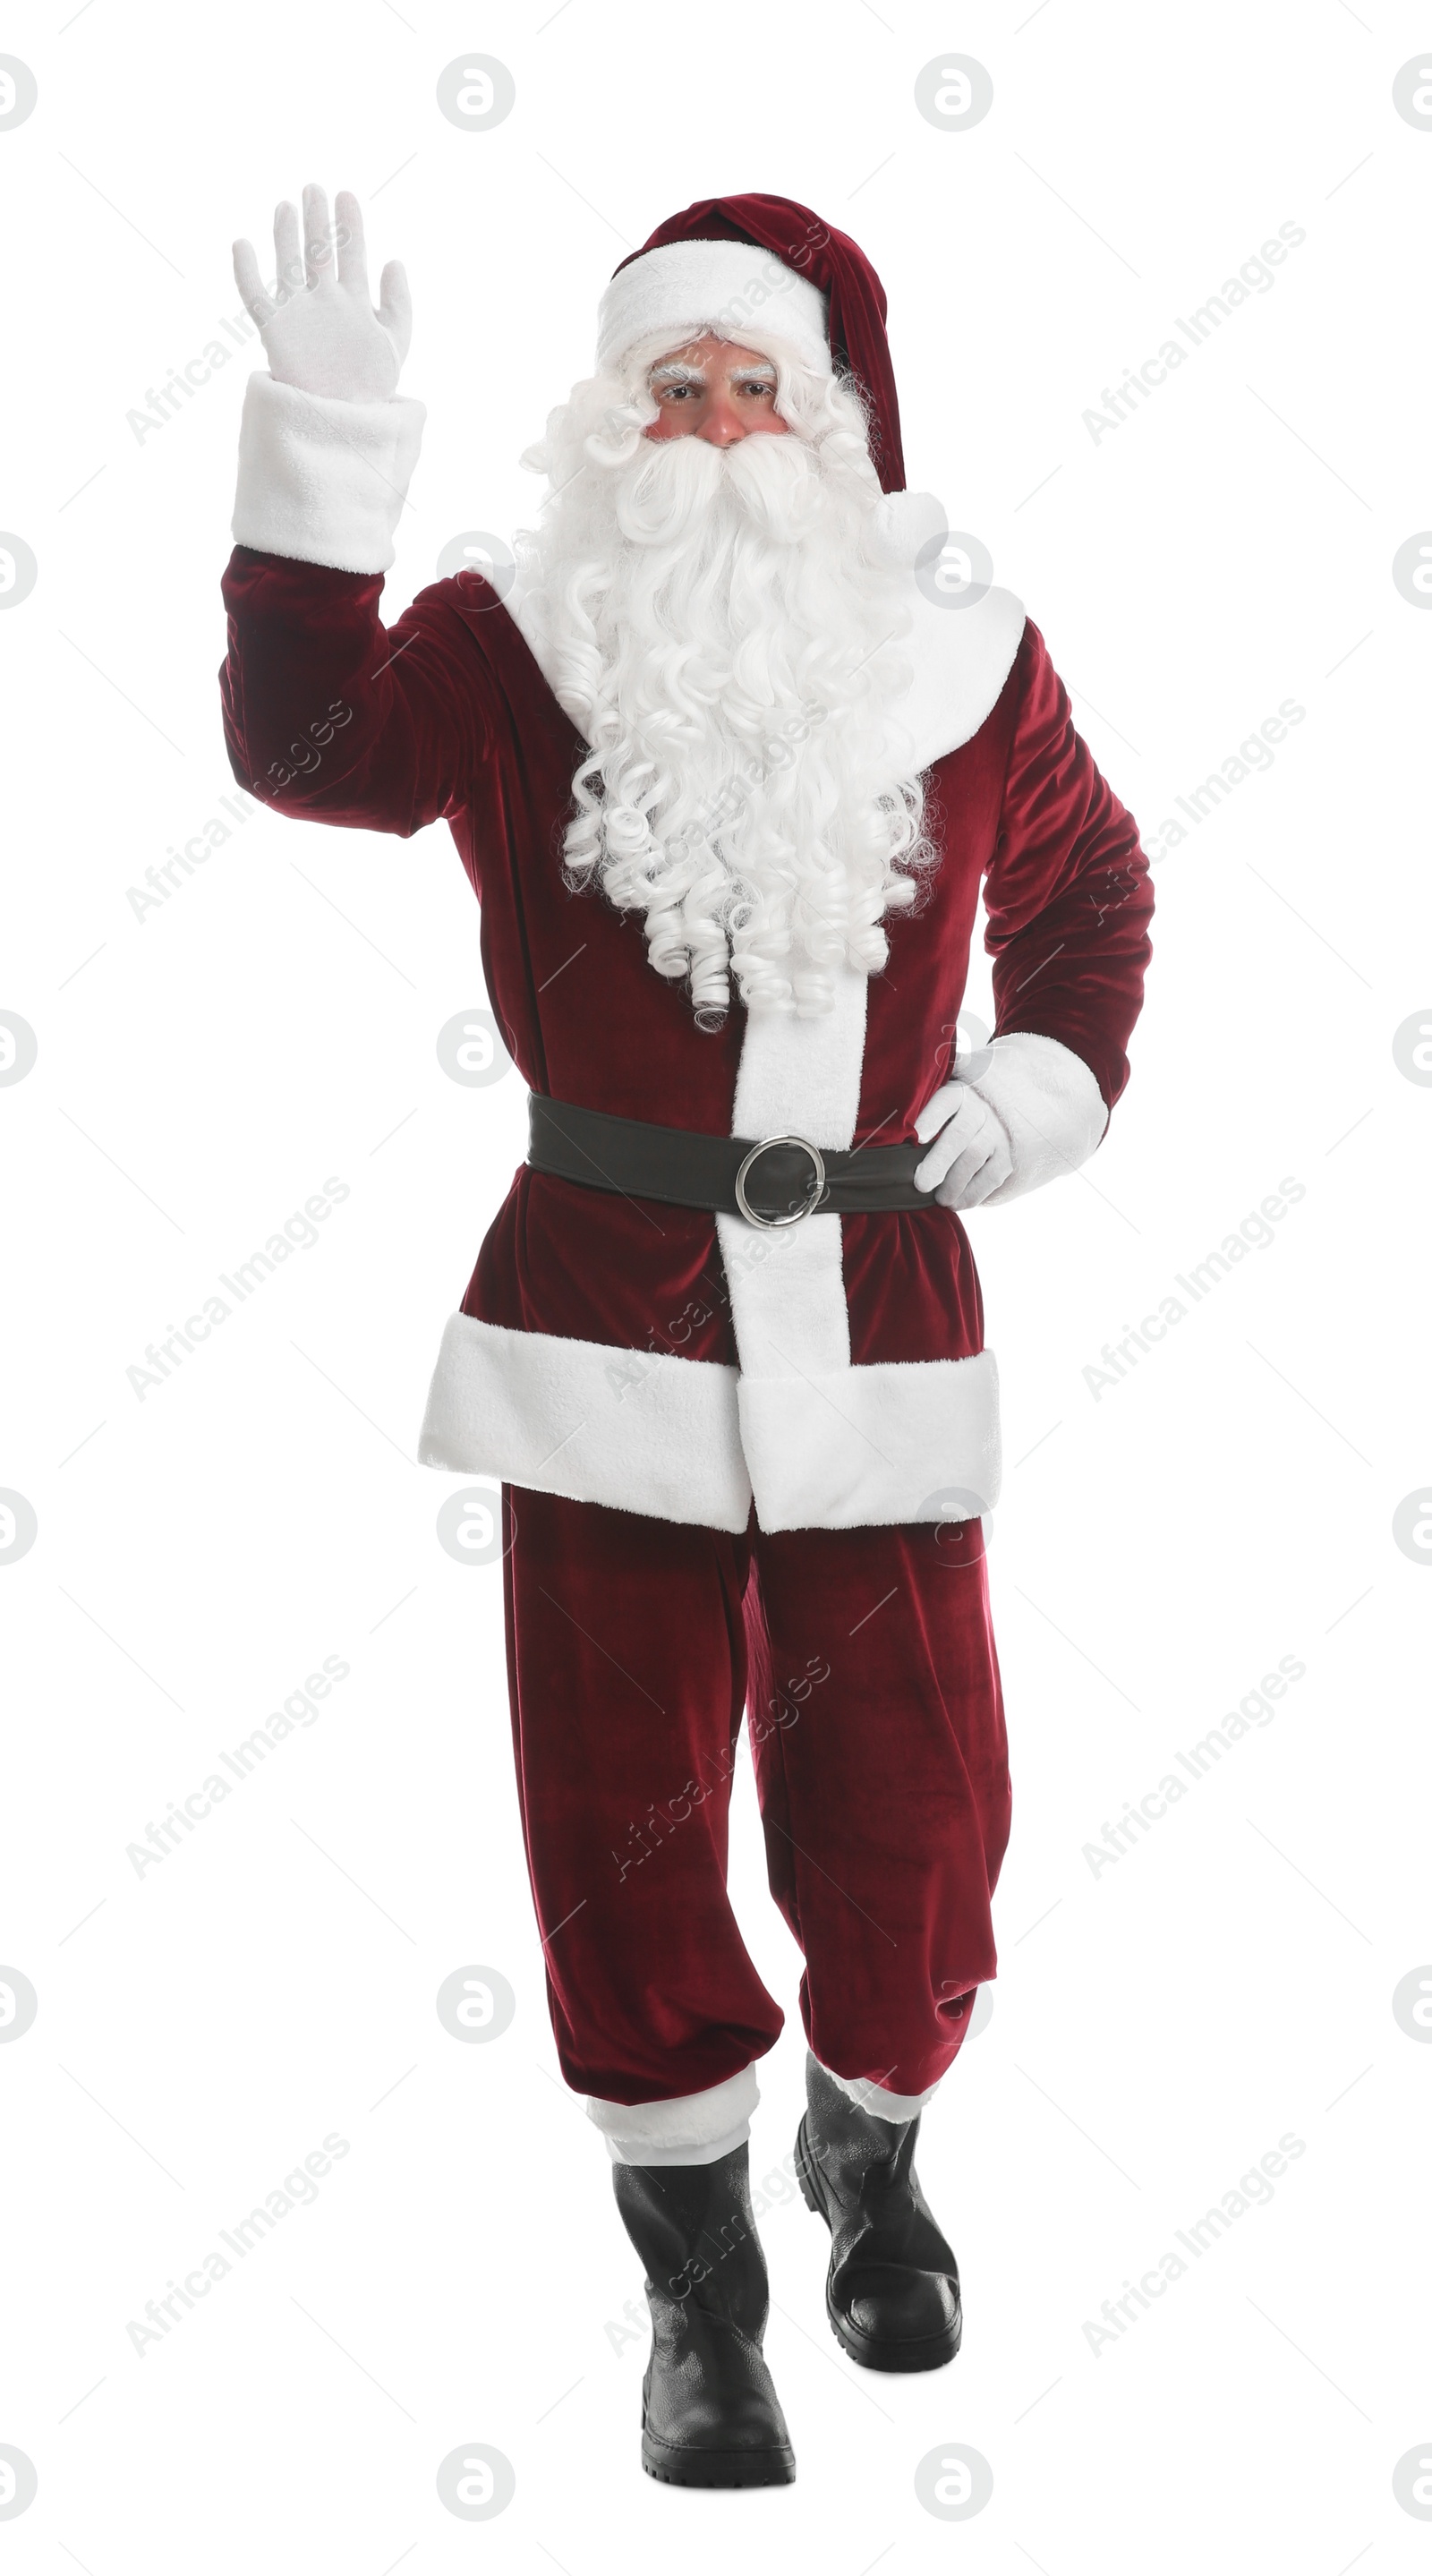 Photo of Santa Claus in costume running on white background